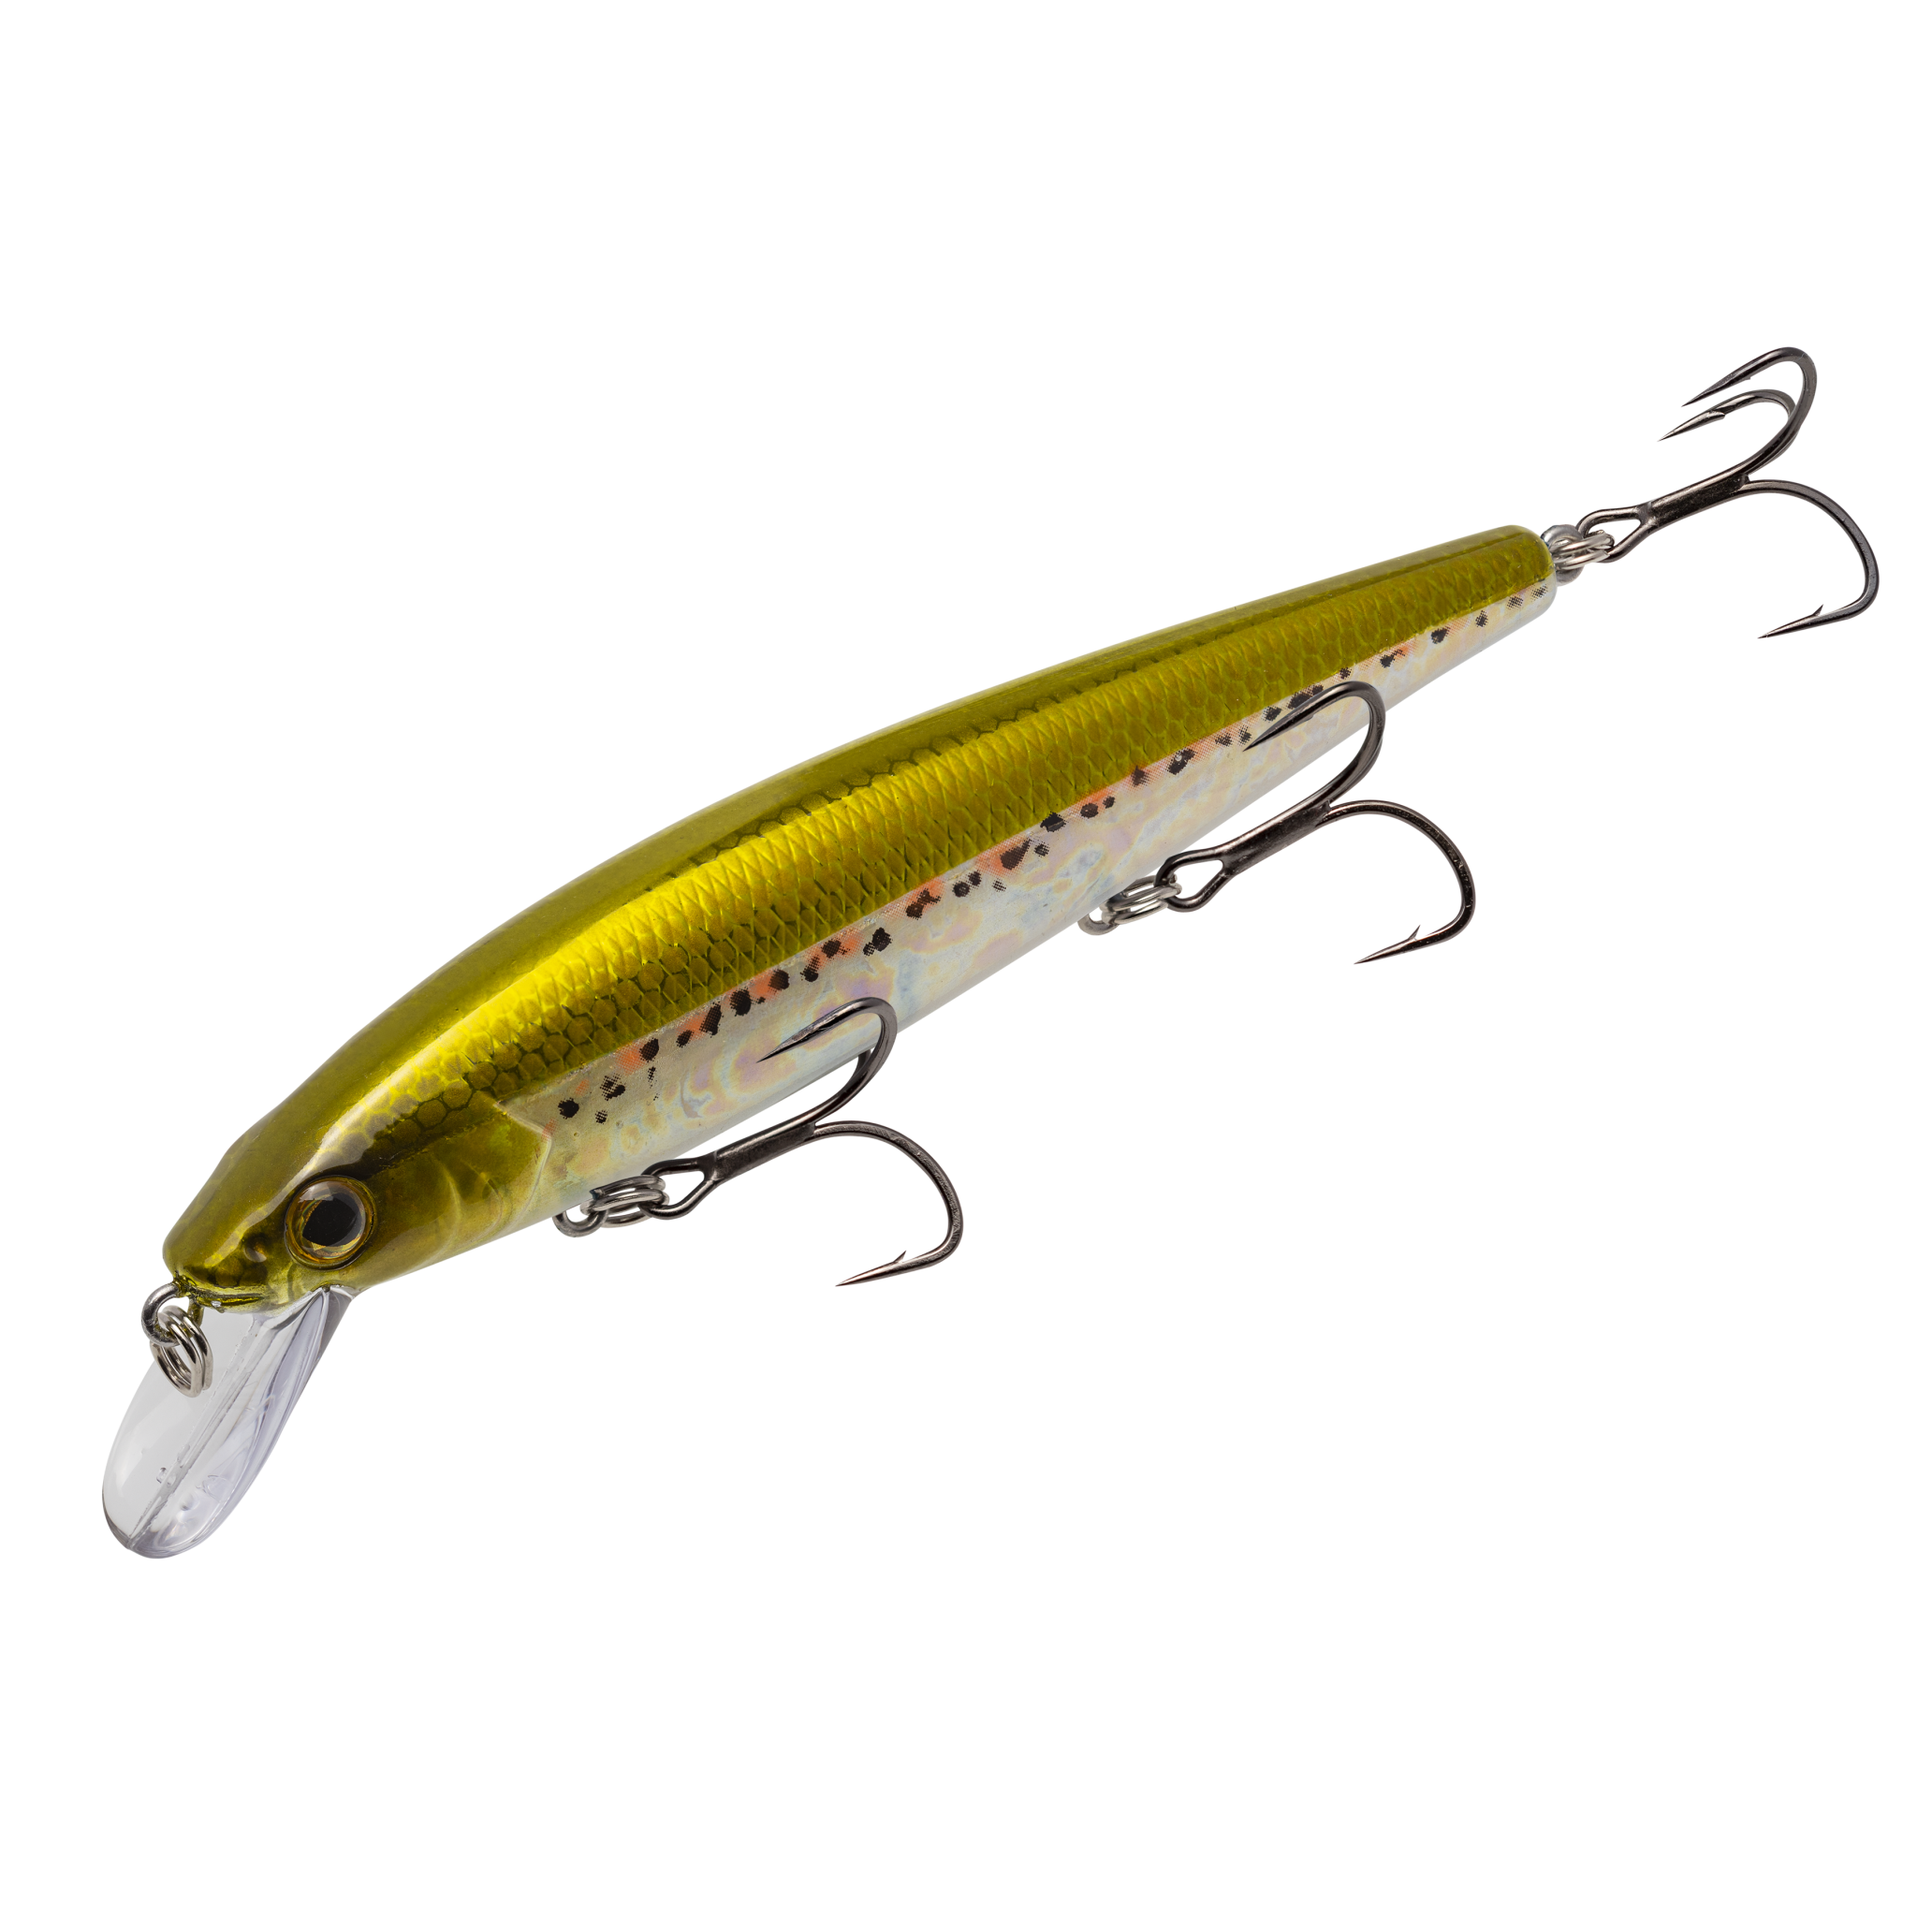 Strike King and KVD collaborate on the Perfect Jerkbait. – Anglers Channel